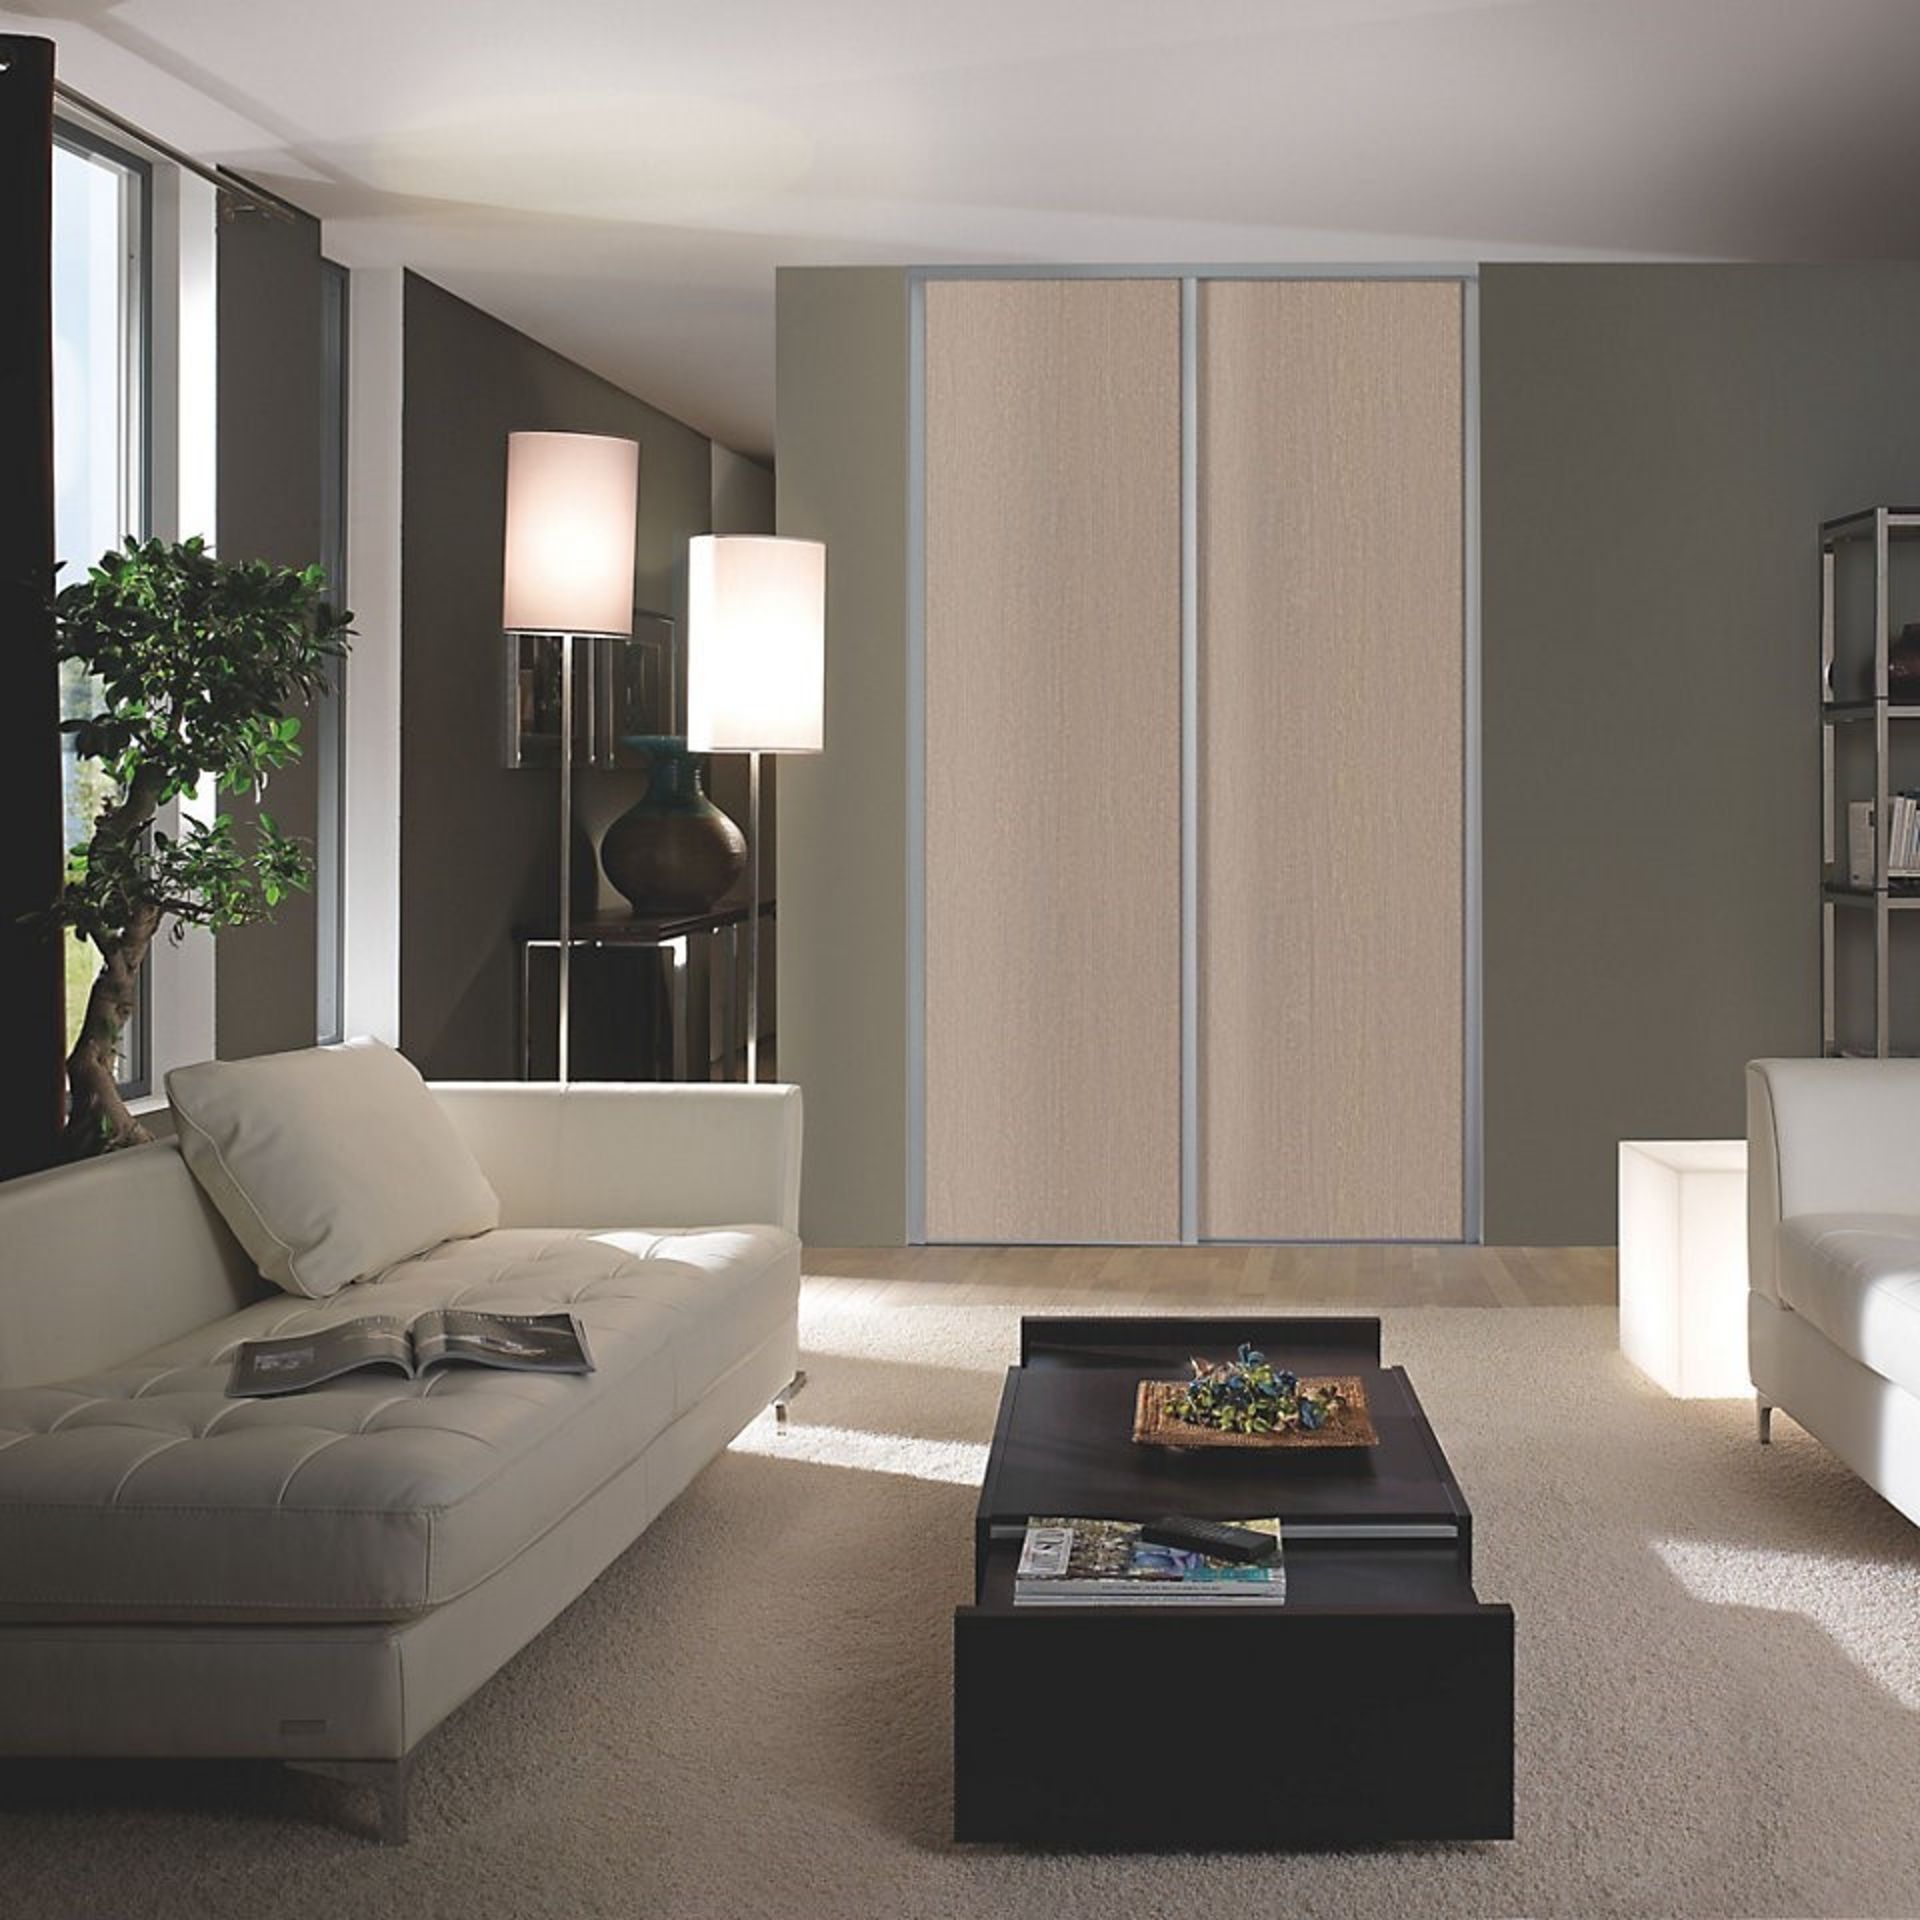 2 x VALLA 1 Sliding Wardrobe Door In Oak With Grey Lacquered Steel Profiles - CL373 - Ref: NC213, NC - Image 4 of 6